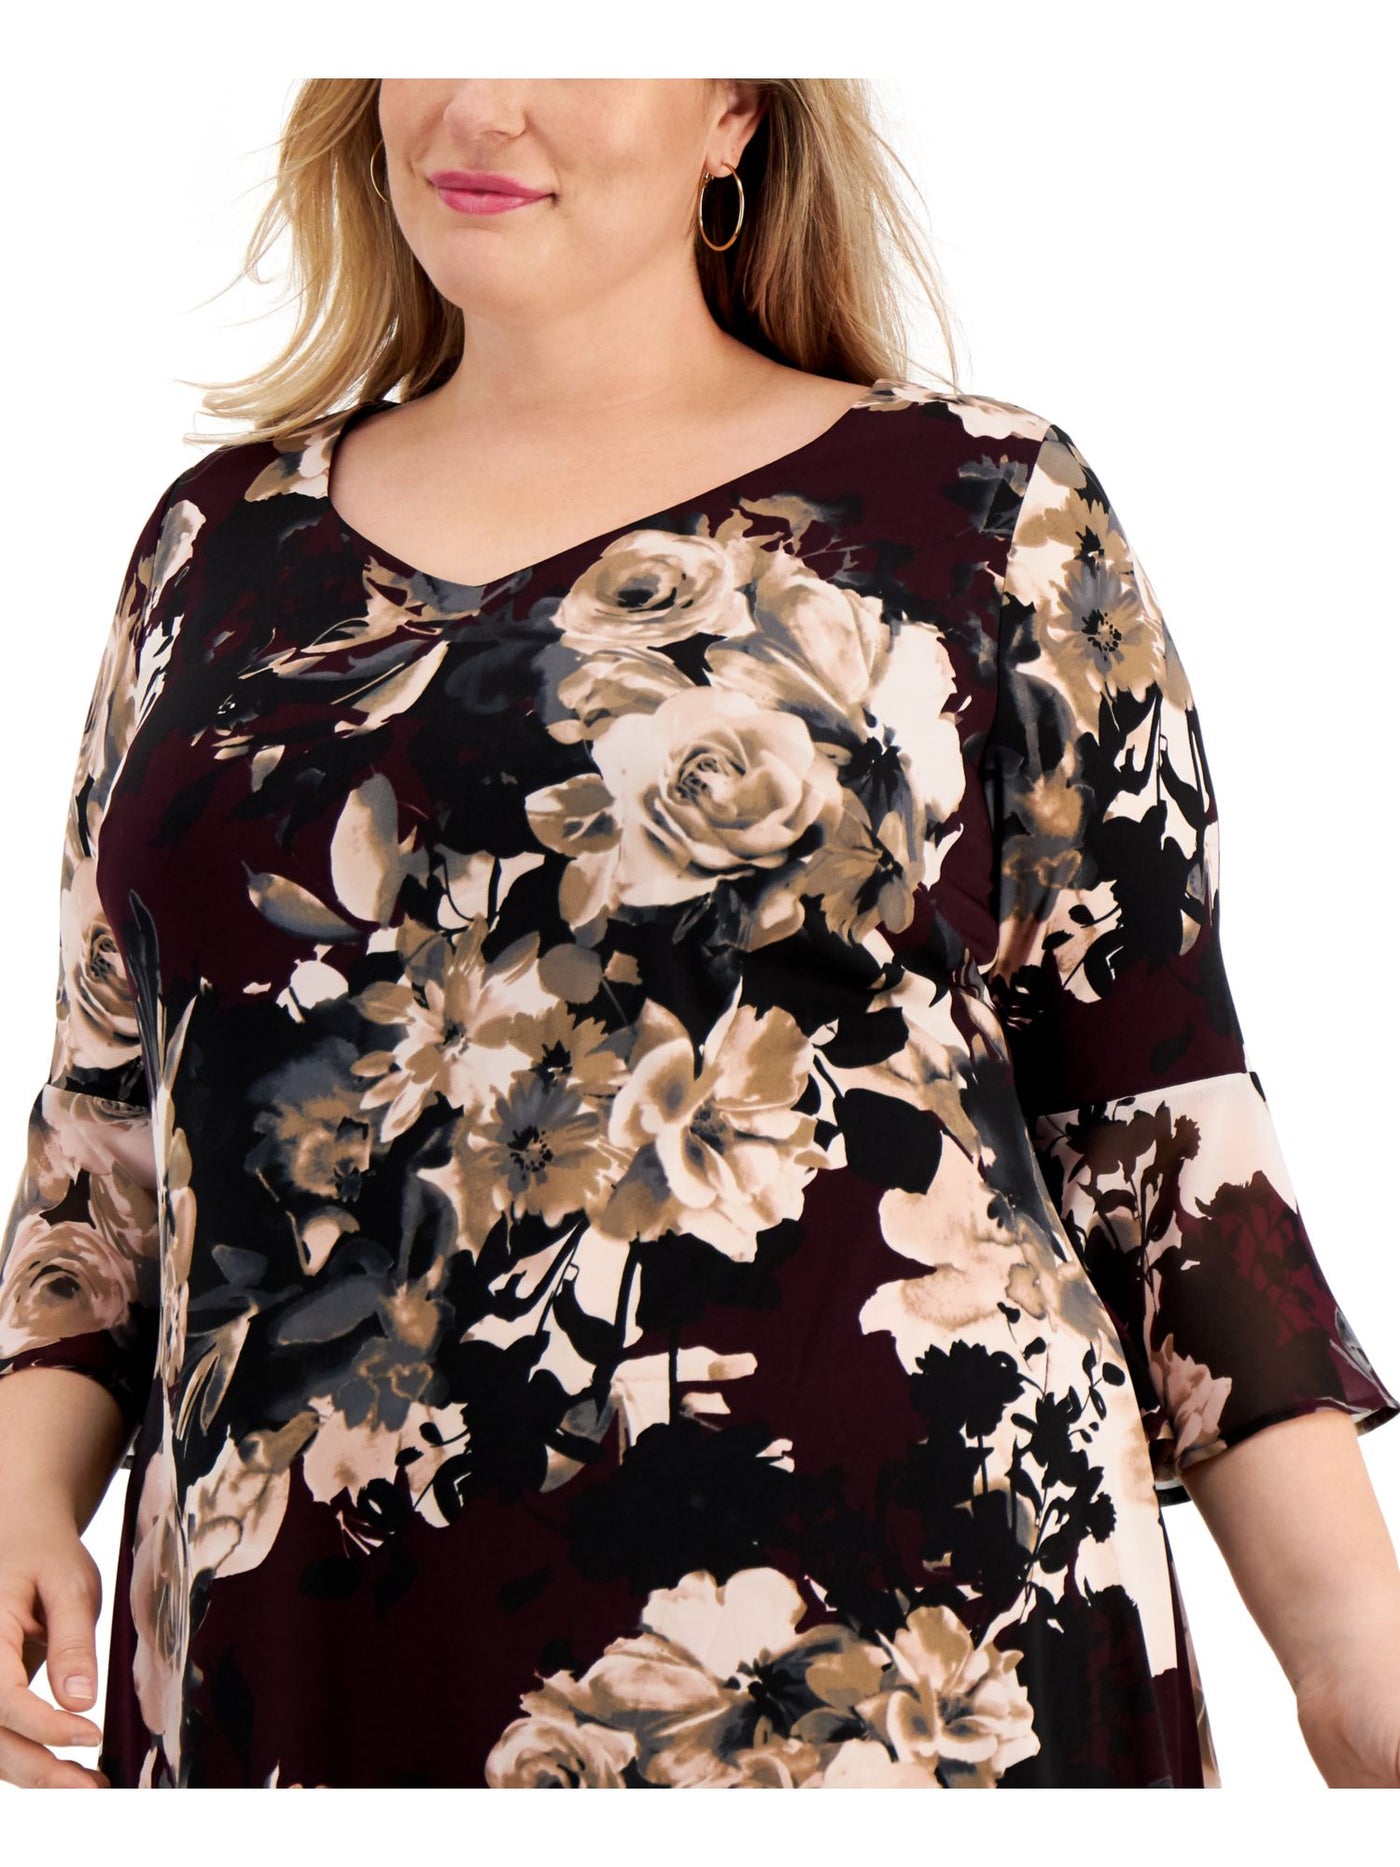 CONNECTED APPAREL Womens Burgundy Stretch Floral Bell Sleeve V Neck Above The Knee Cocktail Fit + Flare Dress Plus 18W